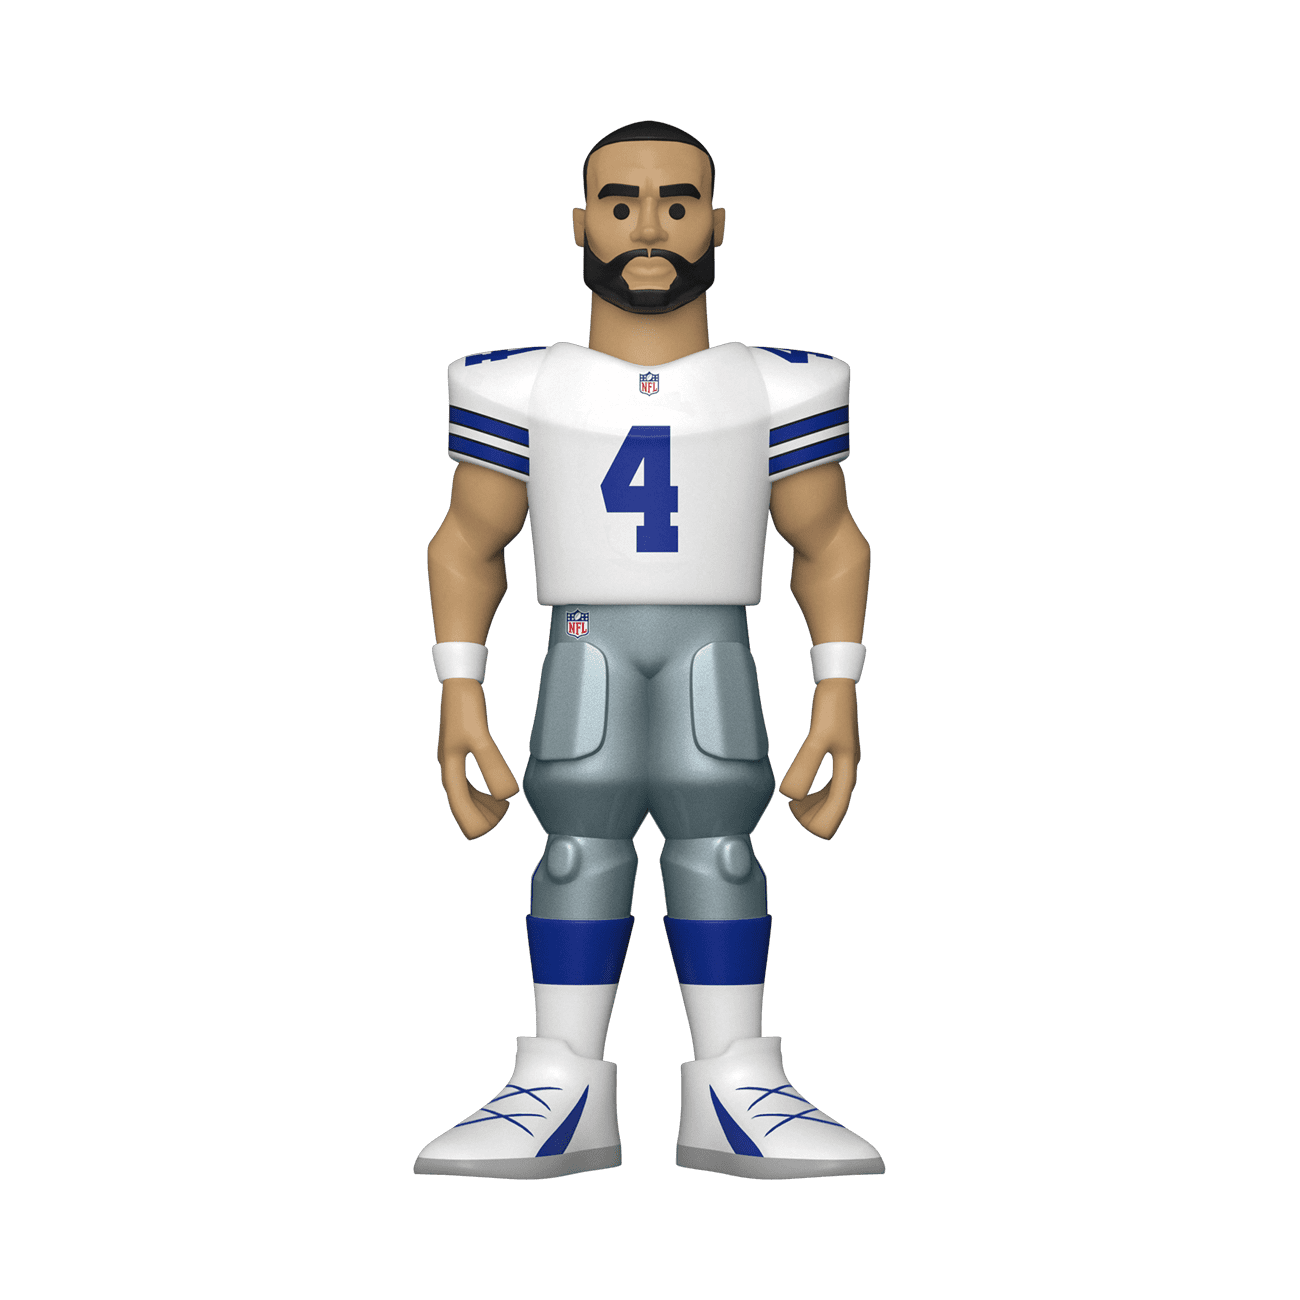 Home Uniform 2021, Toy NUEVO Packers- Aaron Rodgers Styles May V - Funko Gol 